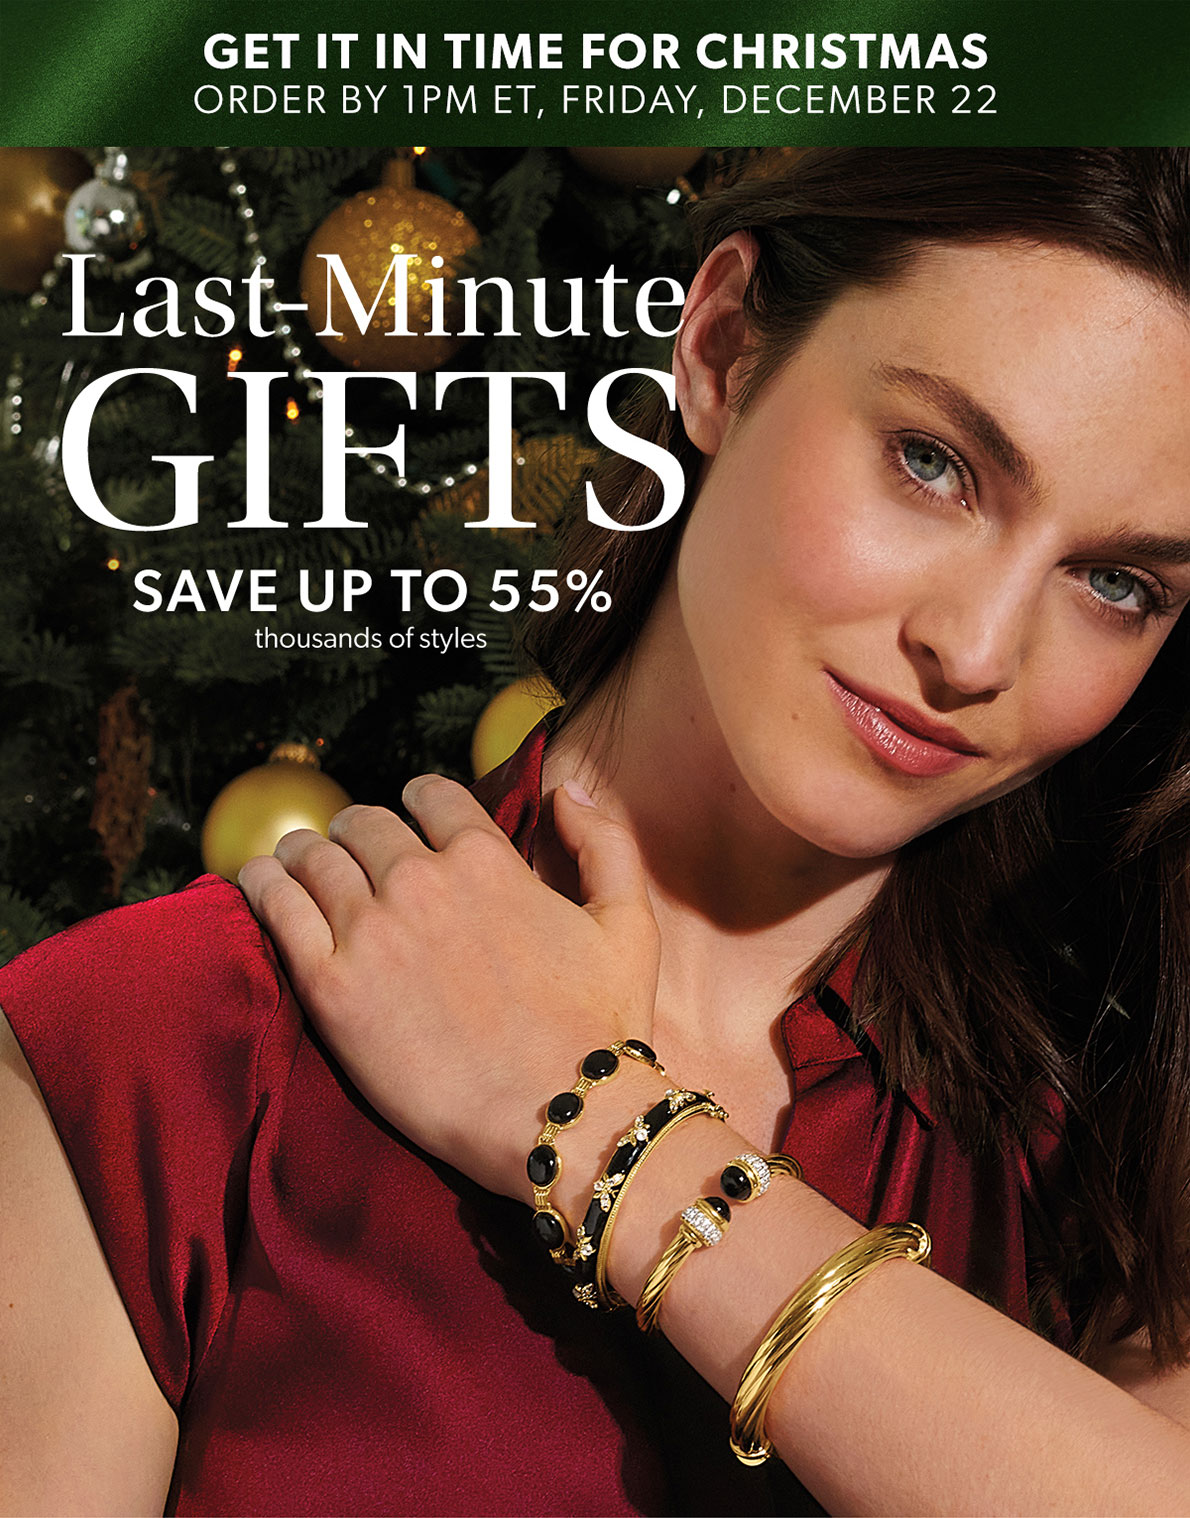 Last-Minute Gifts. Save Up To 55% Thousands of Styles